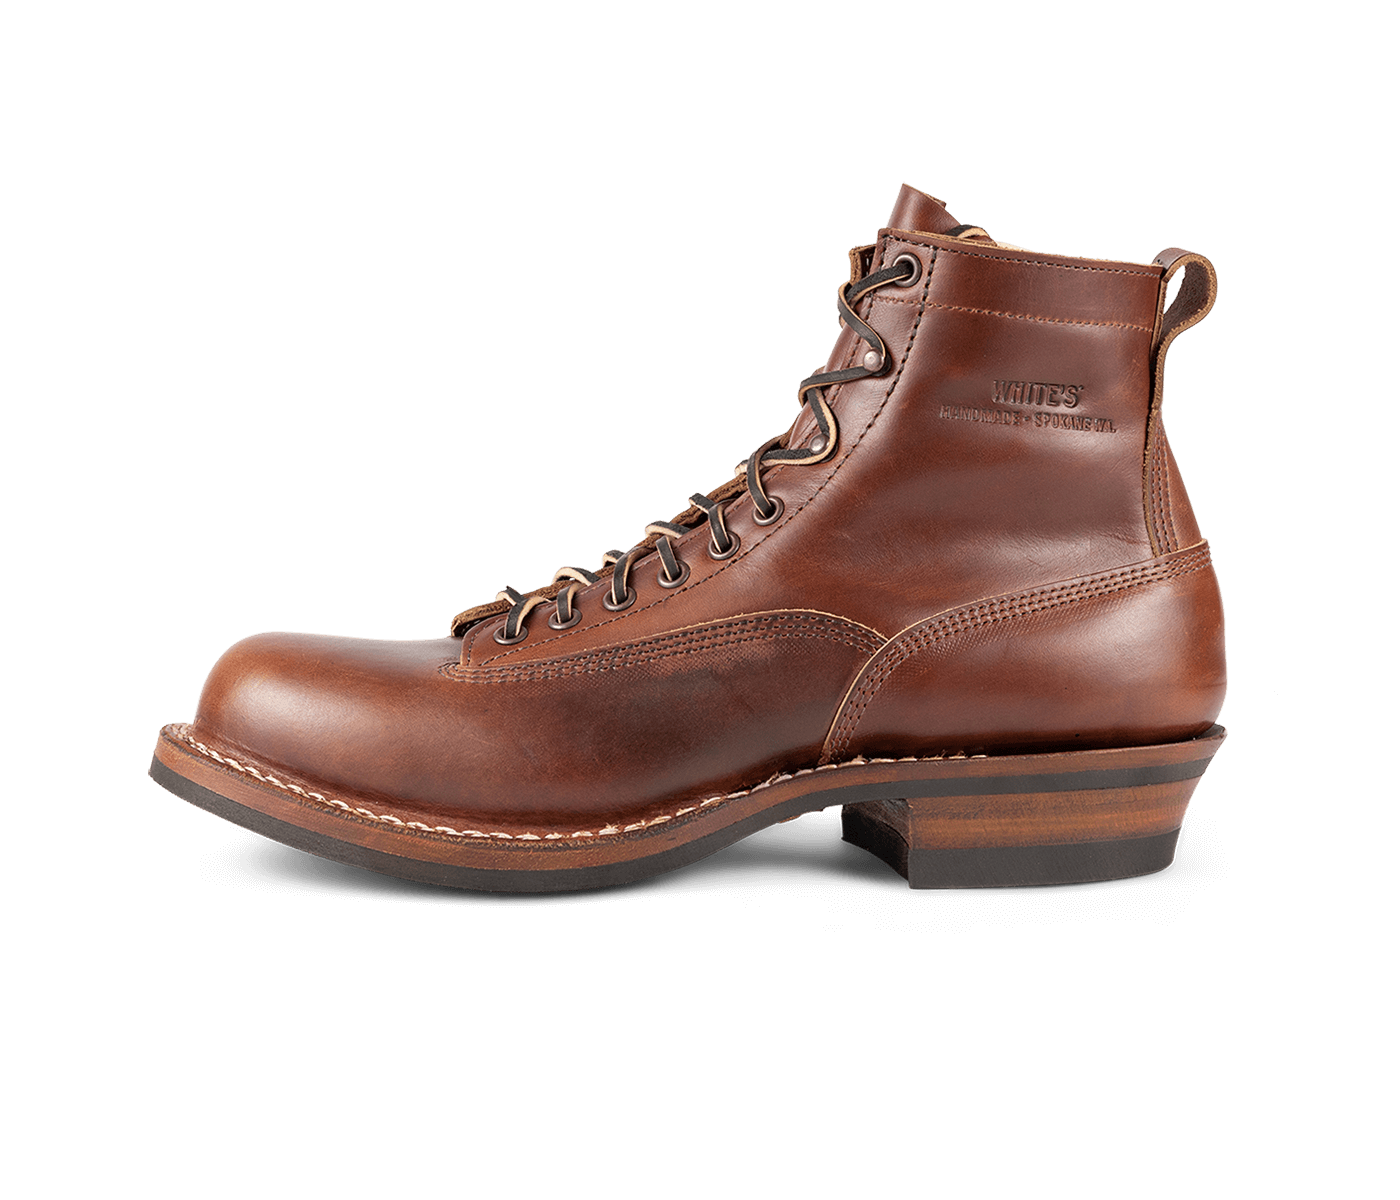 C350 Cutter: White's Boots, Inc.